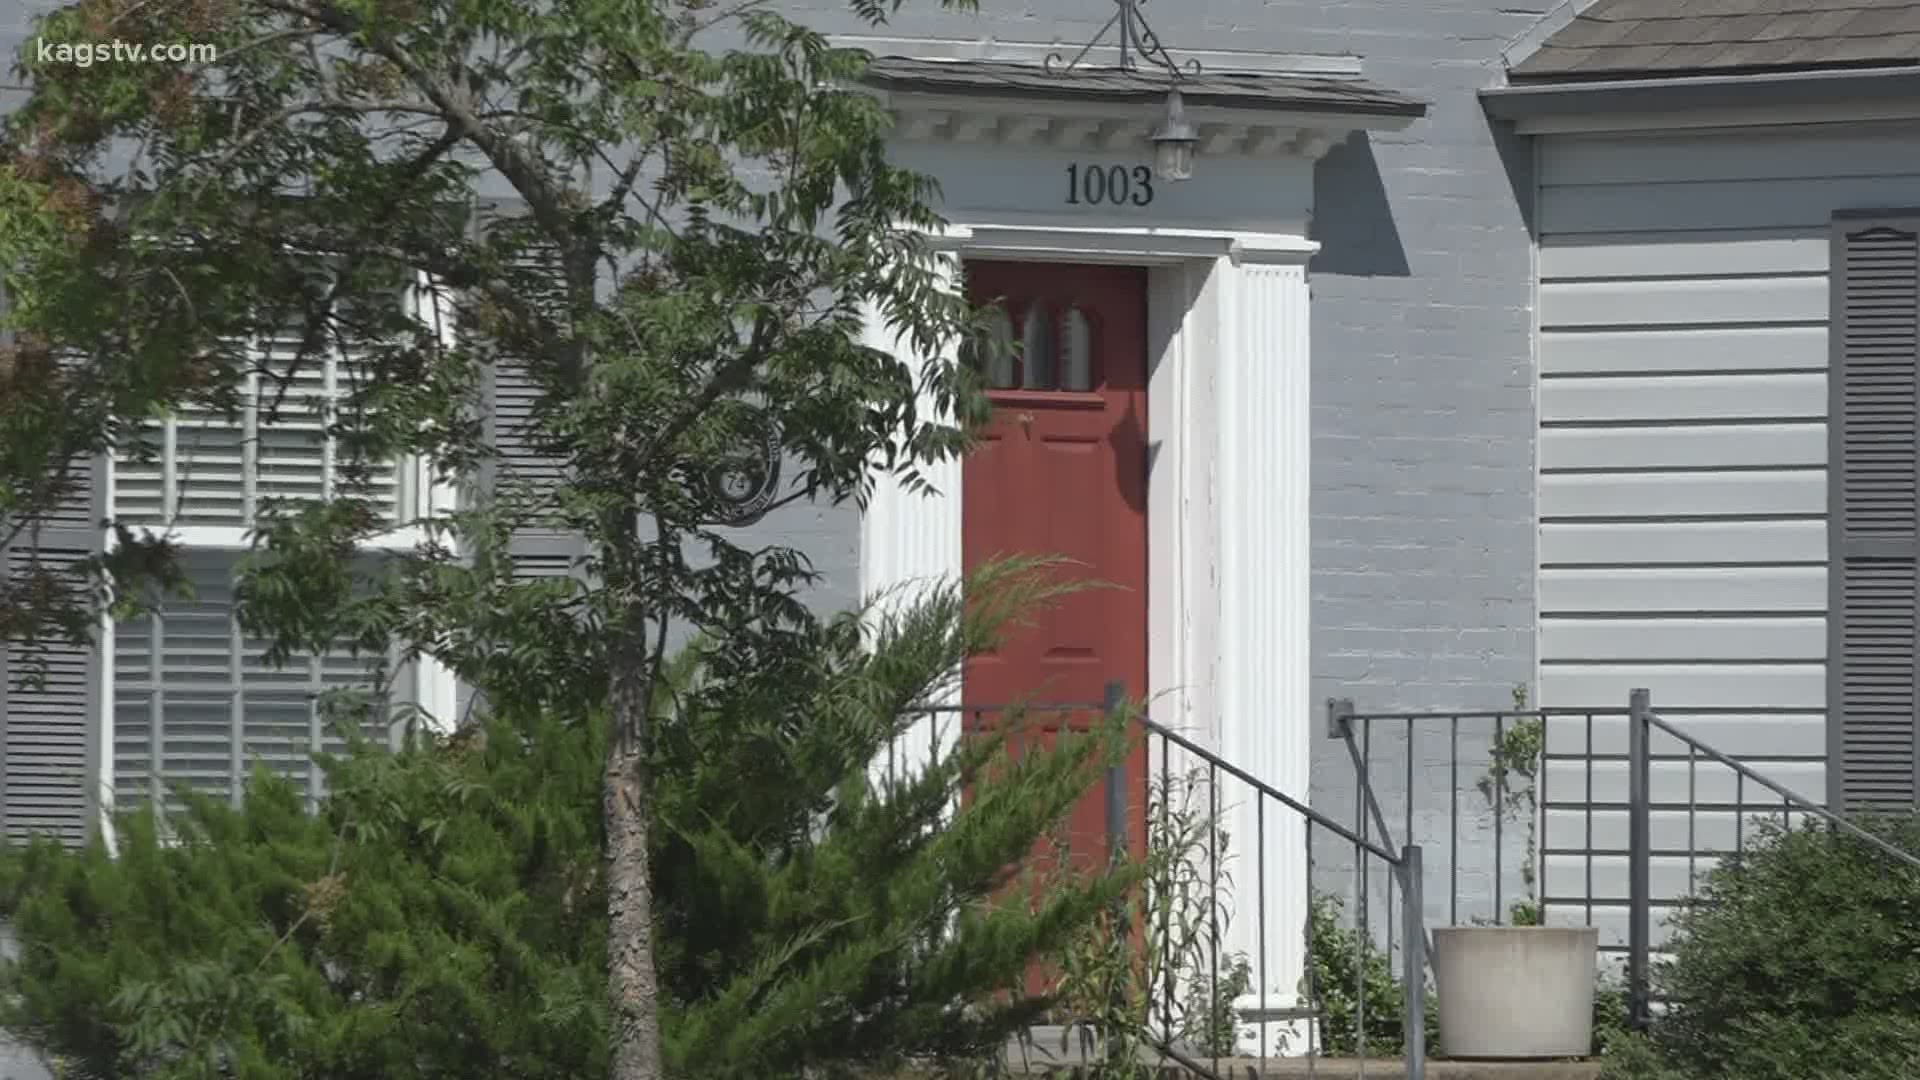 City of College Station asking residents for feedback on proposed home ordinance